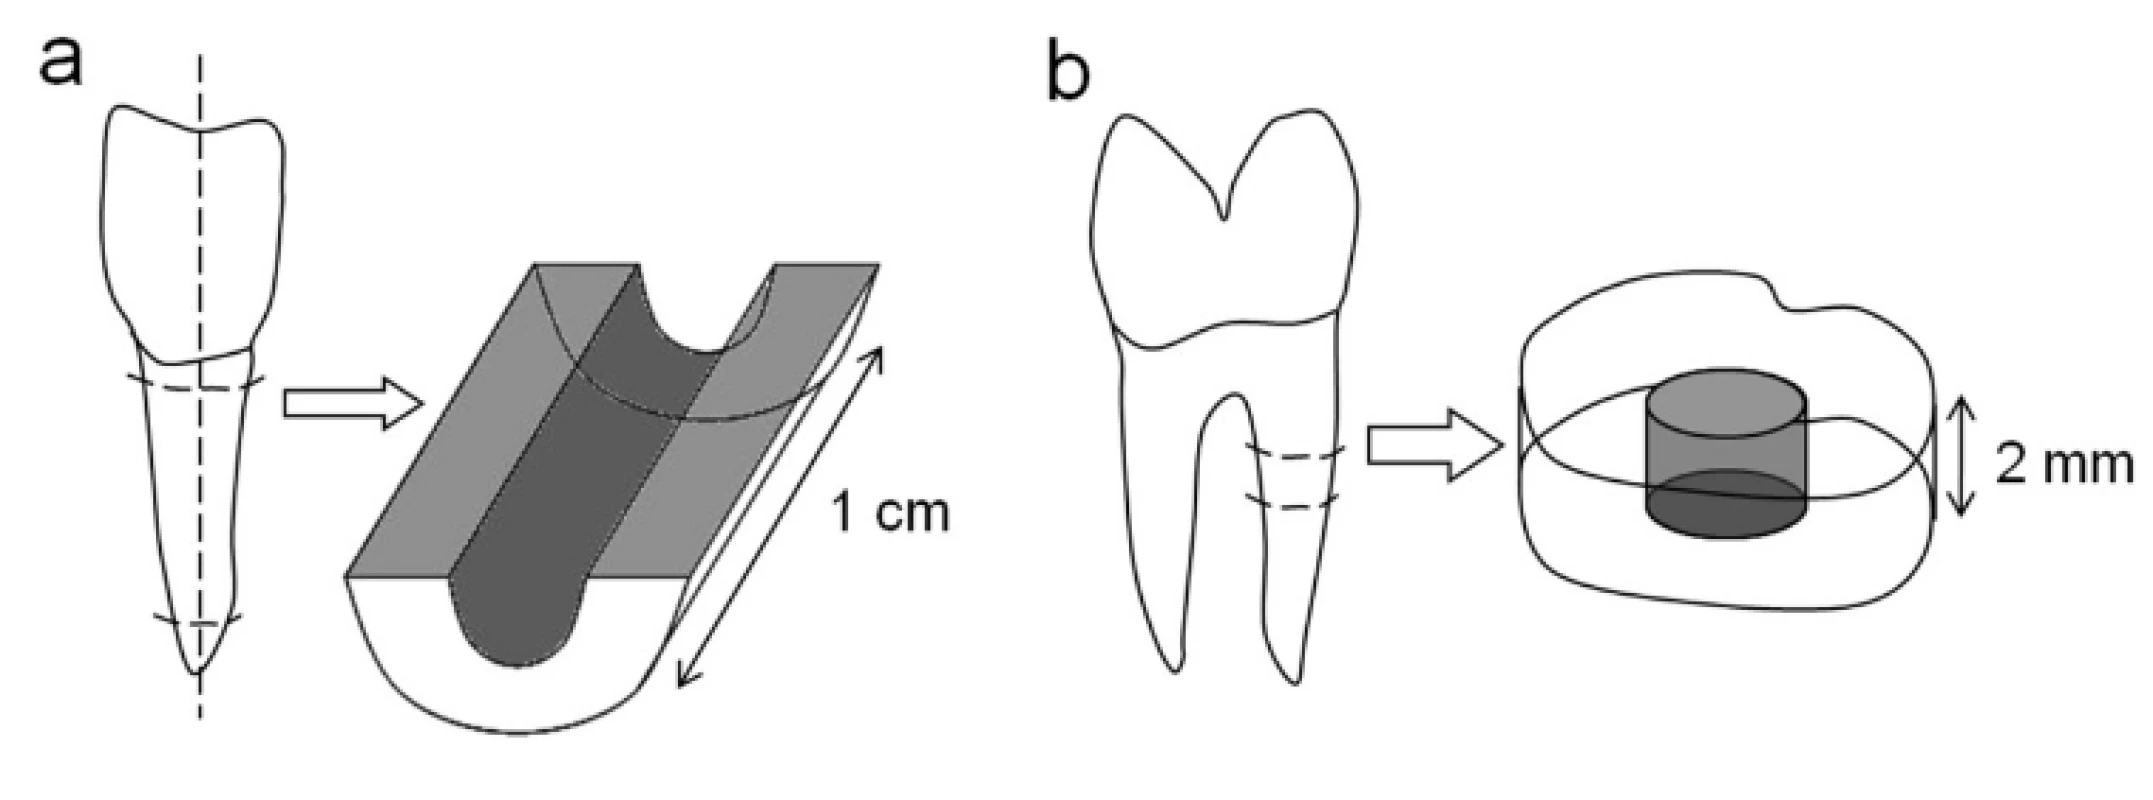 Preparation of bovine and human root canal models. Bovine roots were sectioned longitudinally and the root canal surface was treated with a rose-bur (a). Additionally, human roots were cut horizontally into 2 mm thick discs after root canal preparation (b). Both models underwent ultrasonic desorption to remove the accumulated „smear layer“(abrasive dust, debris).